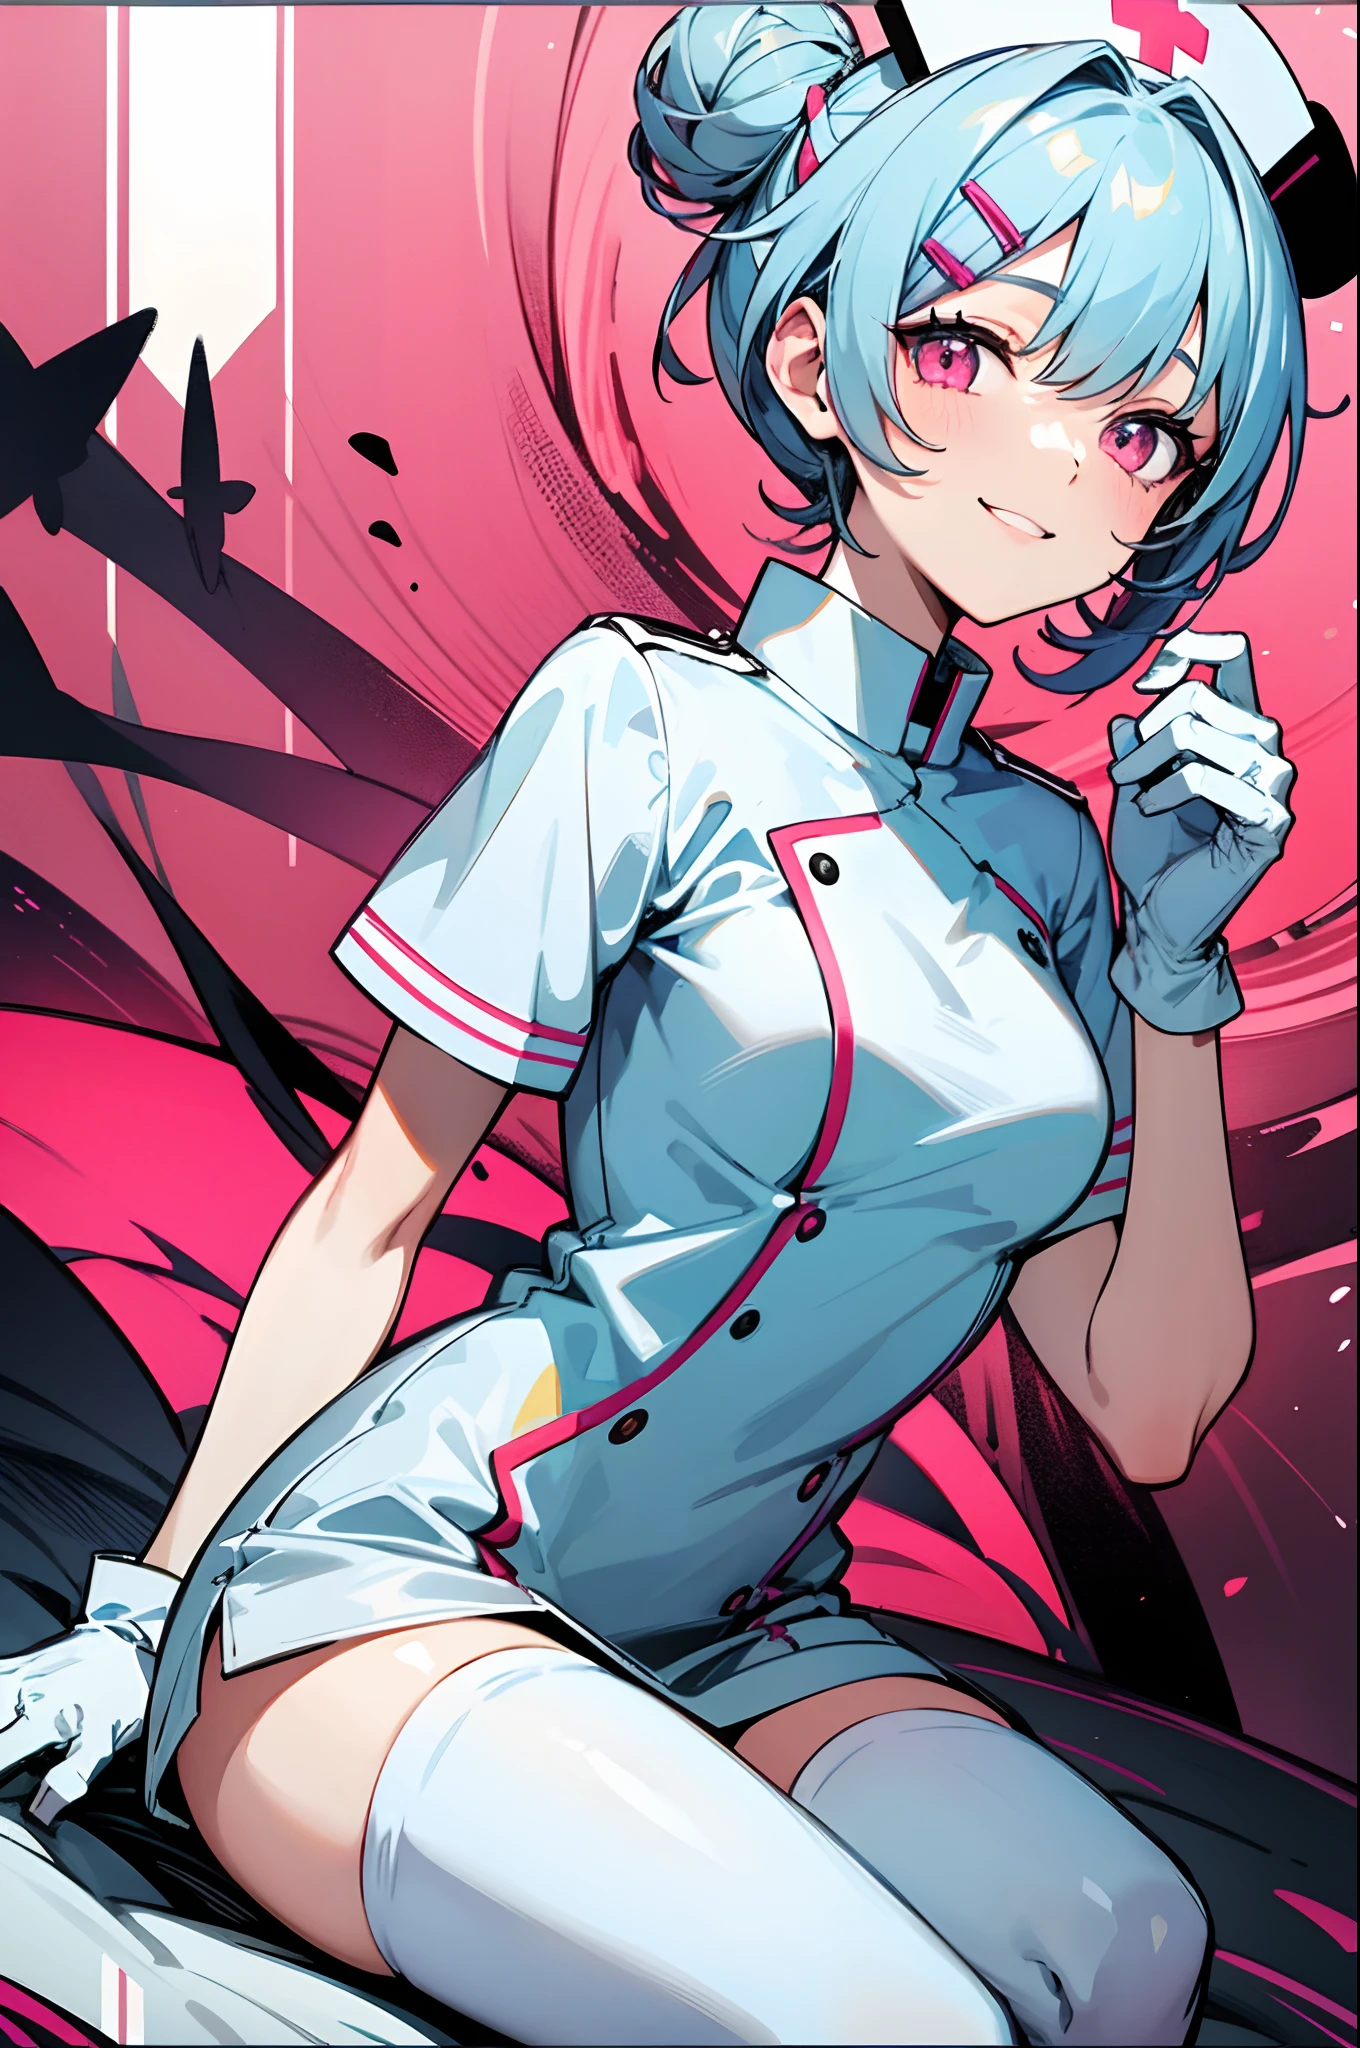 1womanl, Nurse, Nurse Cap, Whiteware, ((White legwear, zettai ryouiki)), White Gloves, Short hairstyle with silver hair and bob, Hair tied in a bun with a hair clip, Pink eyes, Smile, sharp outline, Short sleeves, a matural female, 35 year old, Best Quality, masutepiece, Infirmary